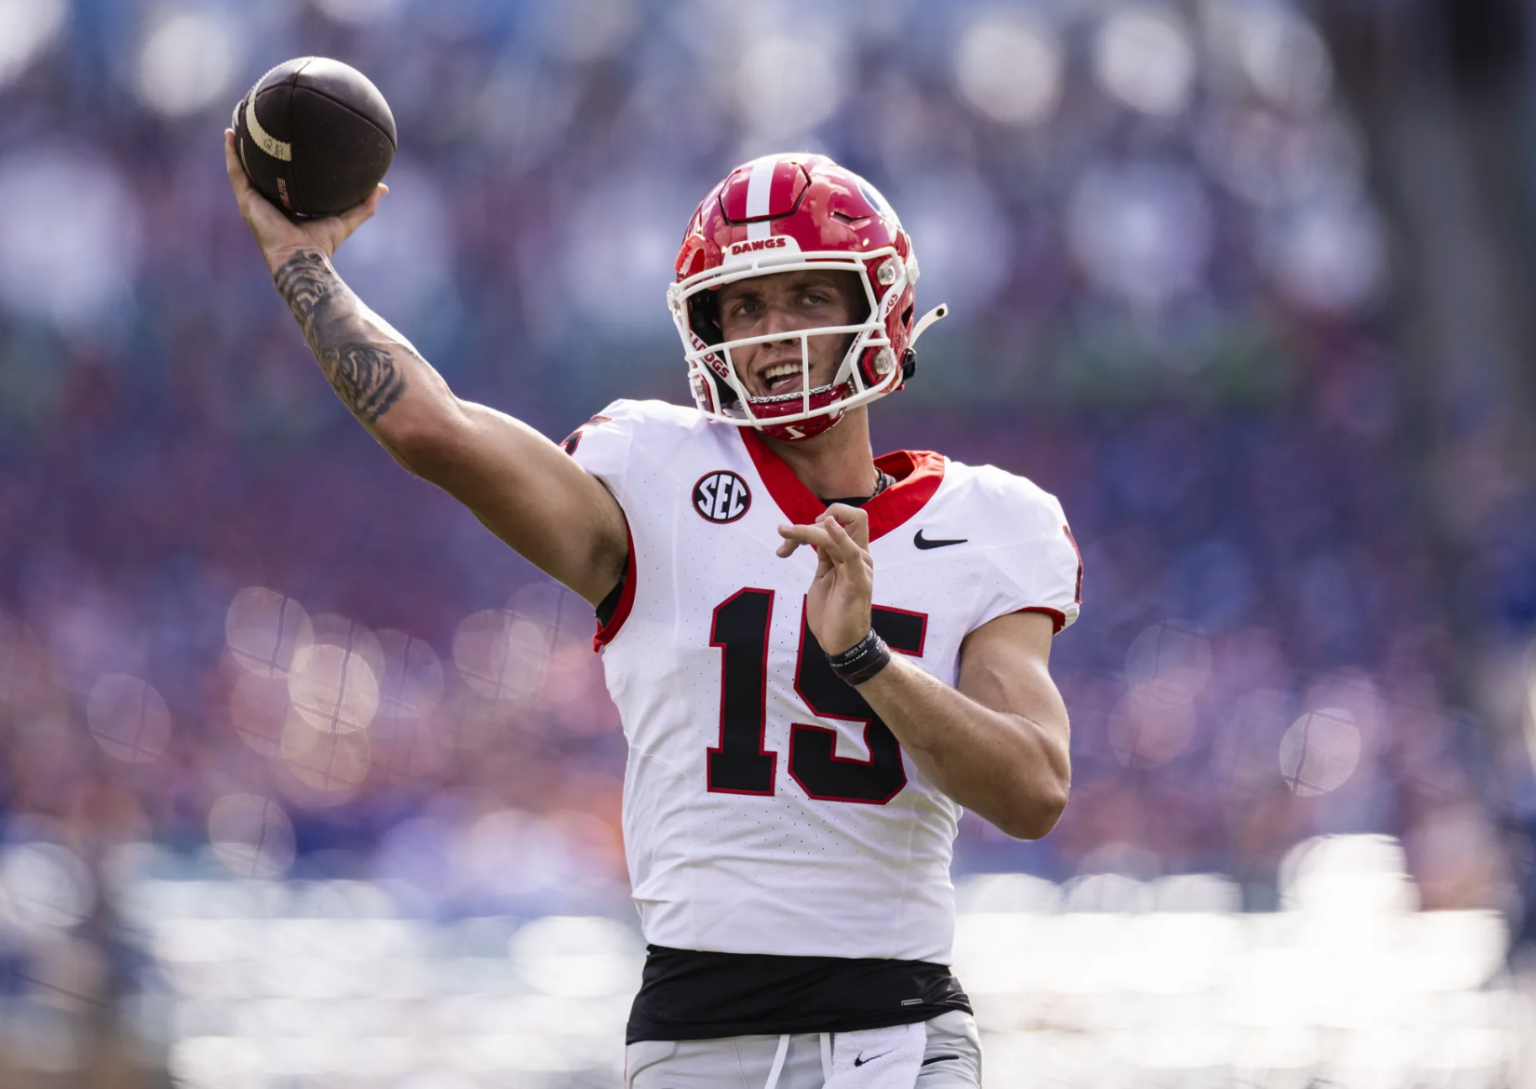 Can UGA Cover this Massive Spread against Mizzou?